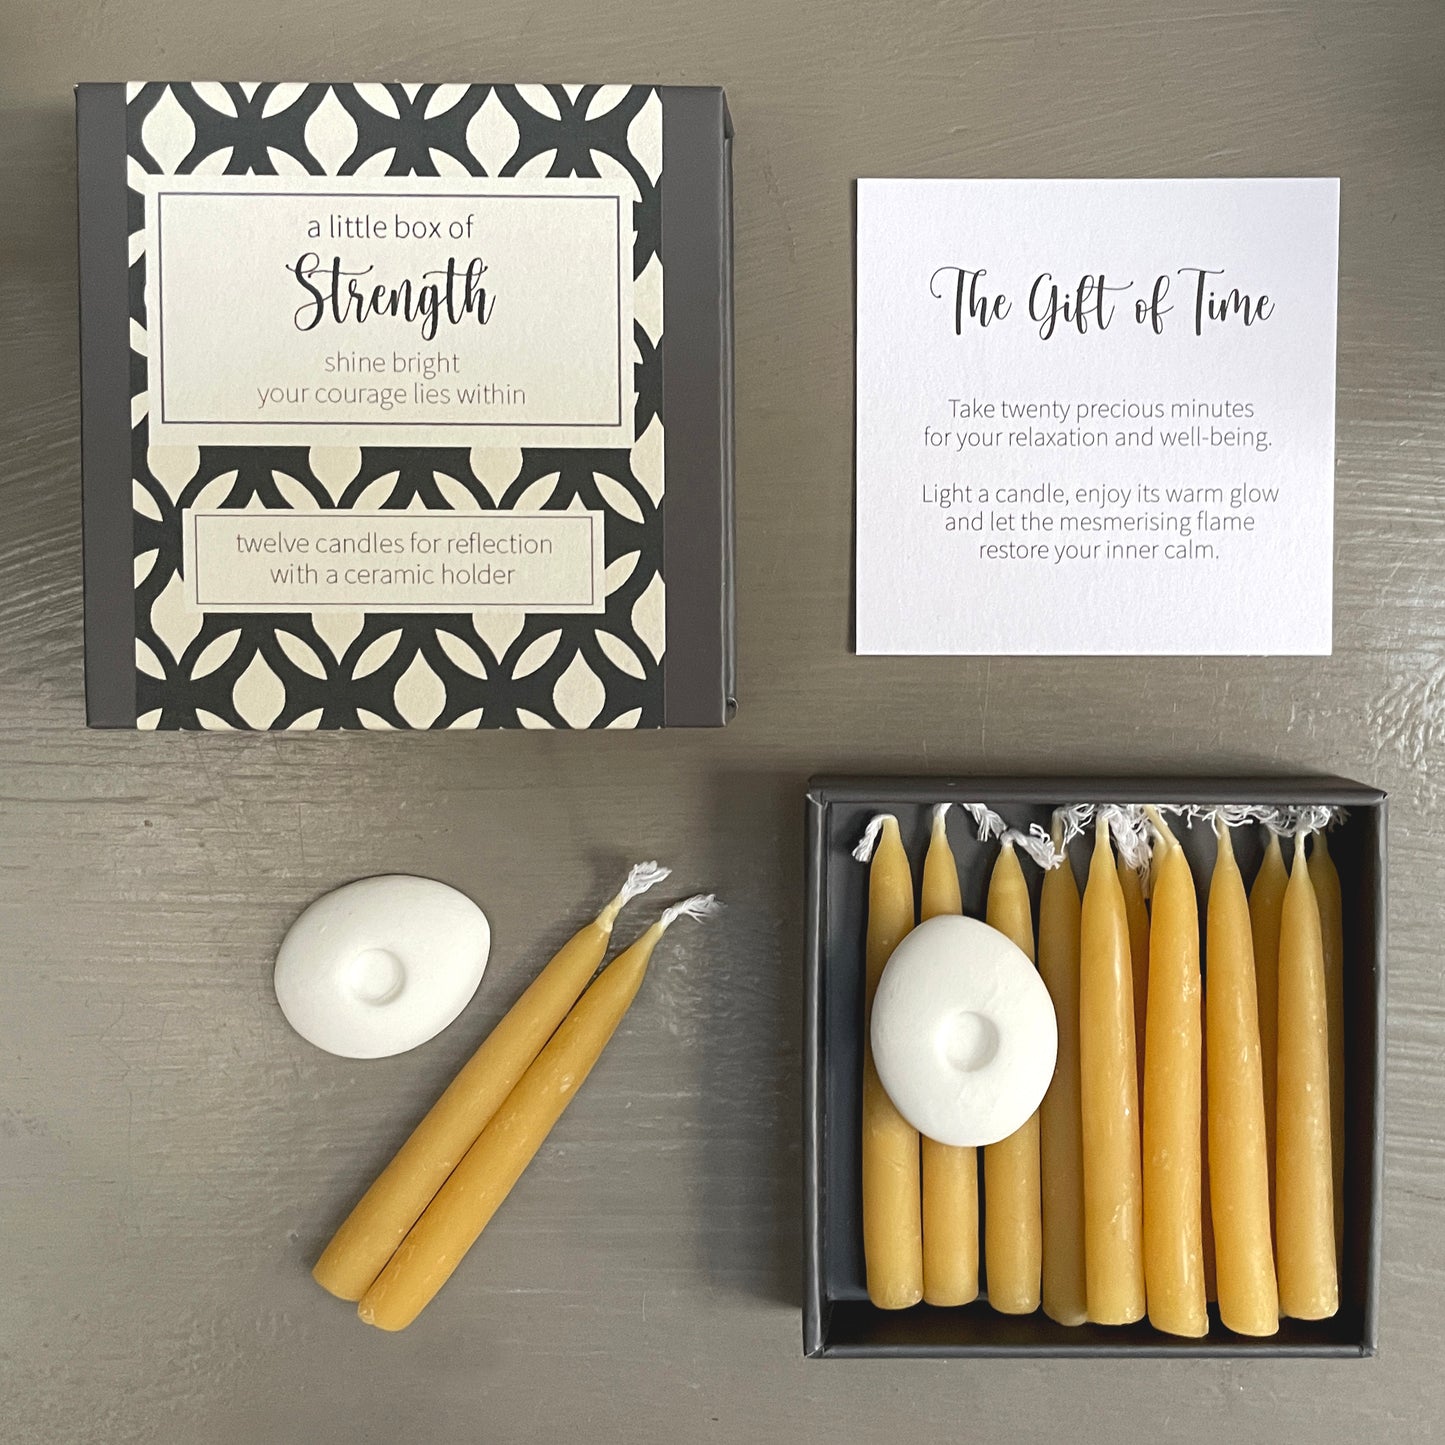 Cotton & Grey A Little Box Of Strength Candles Be Brave Candle Gift Idea